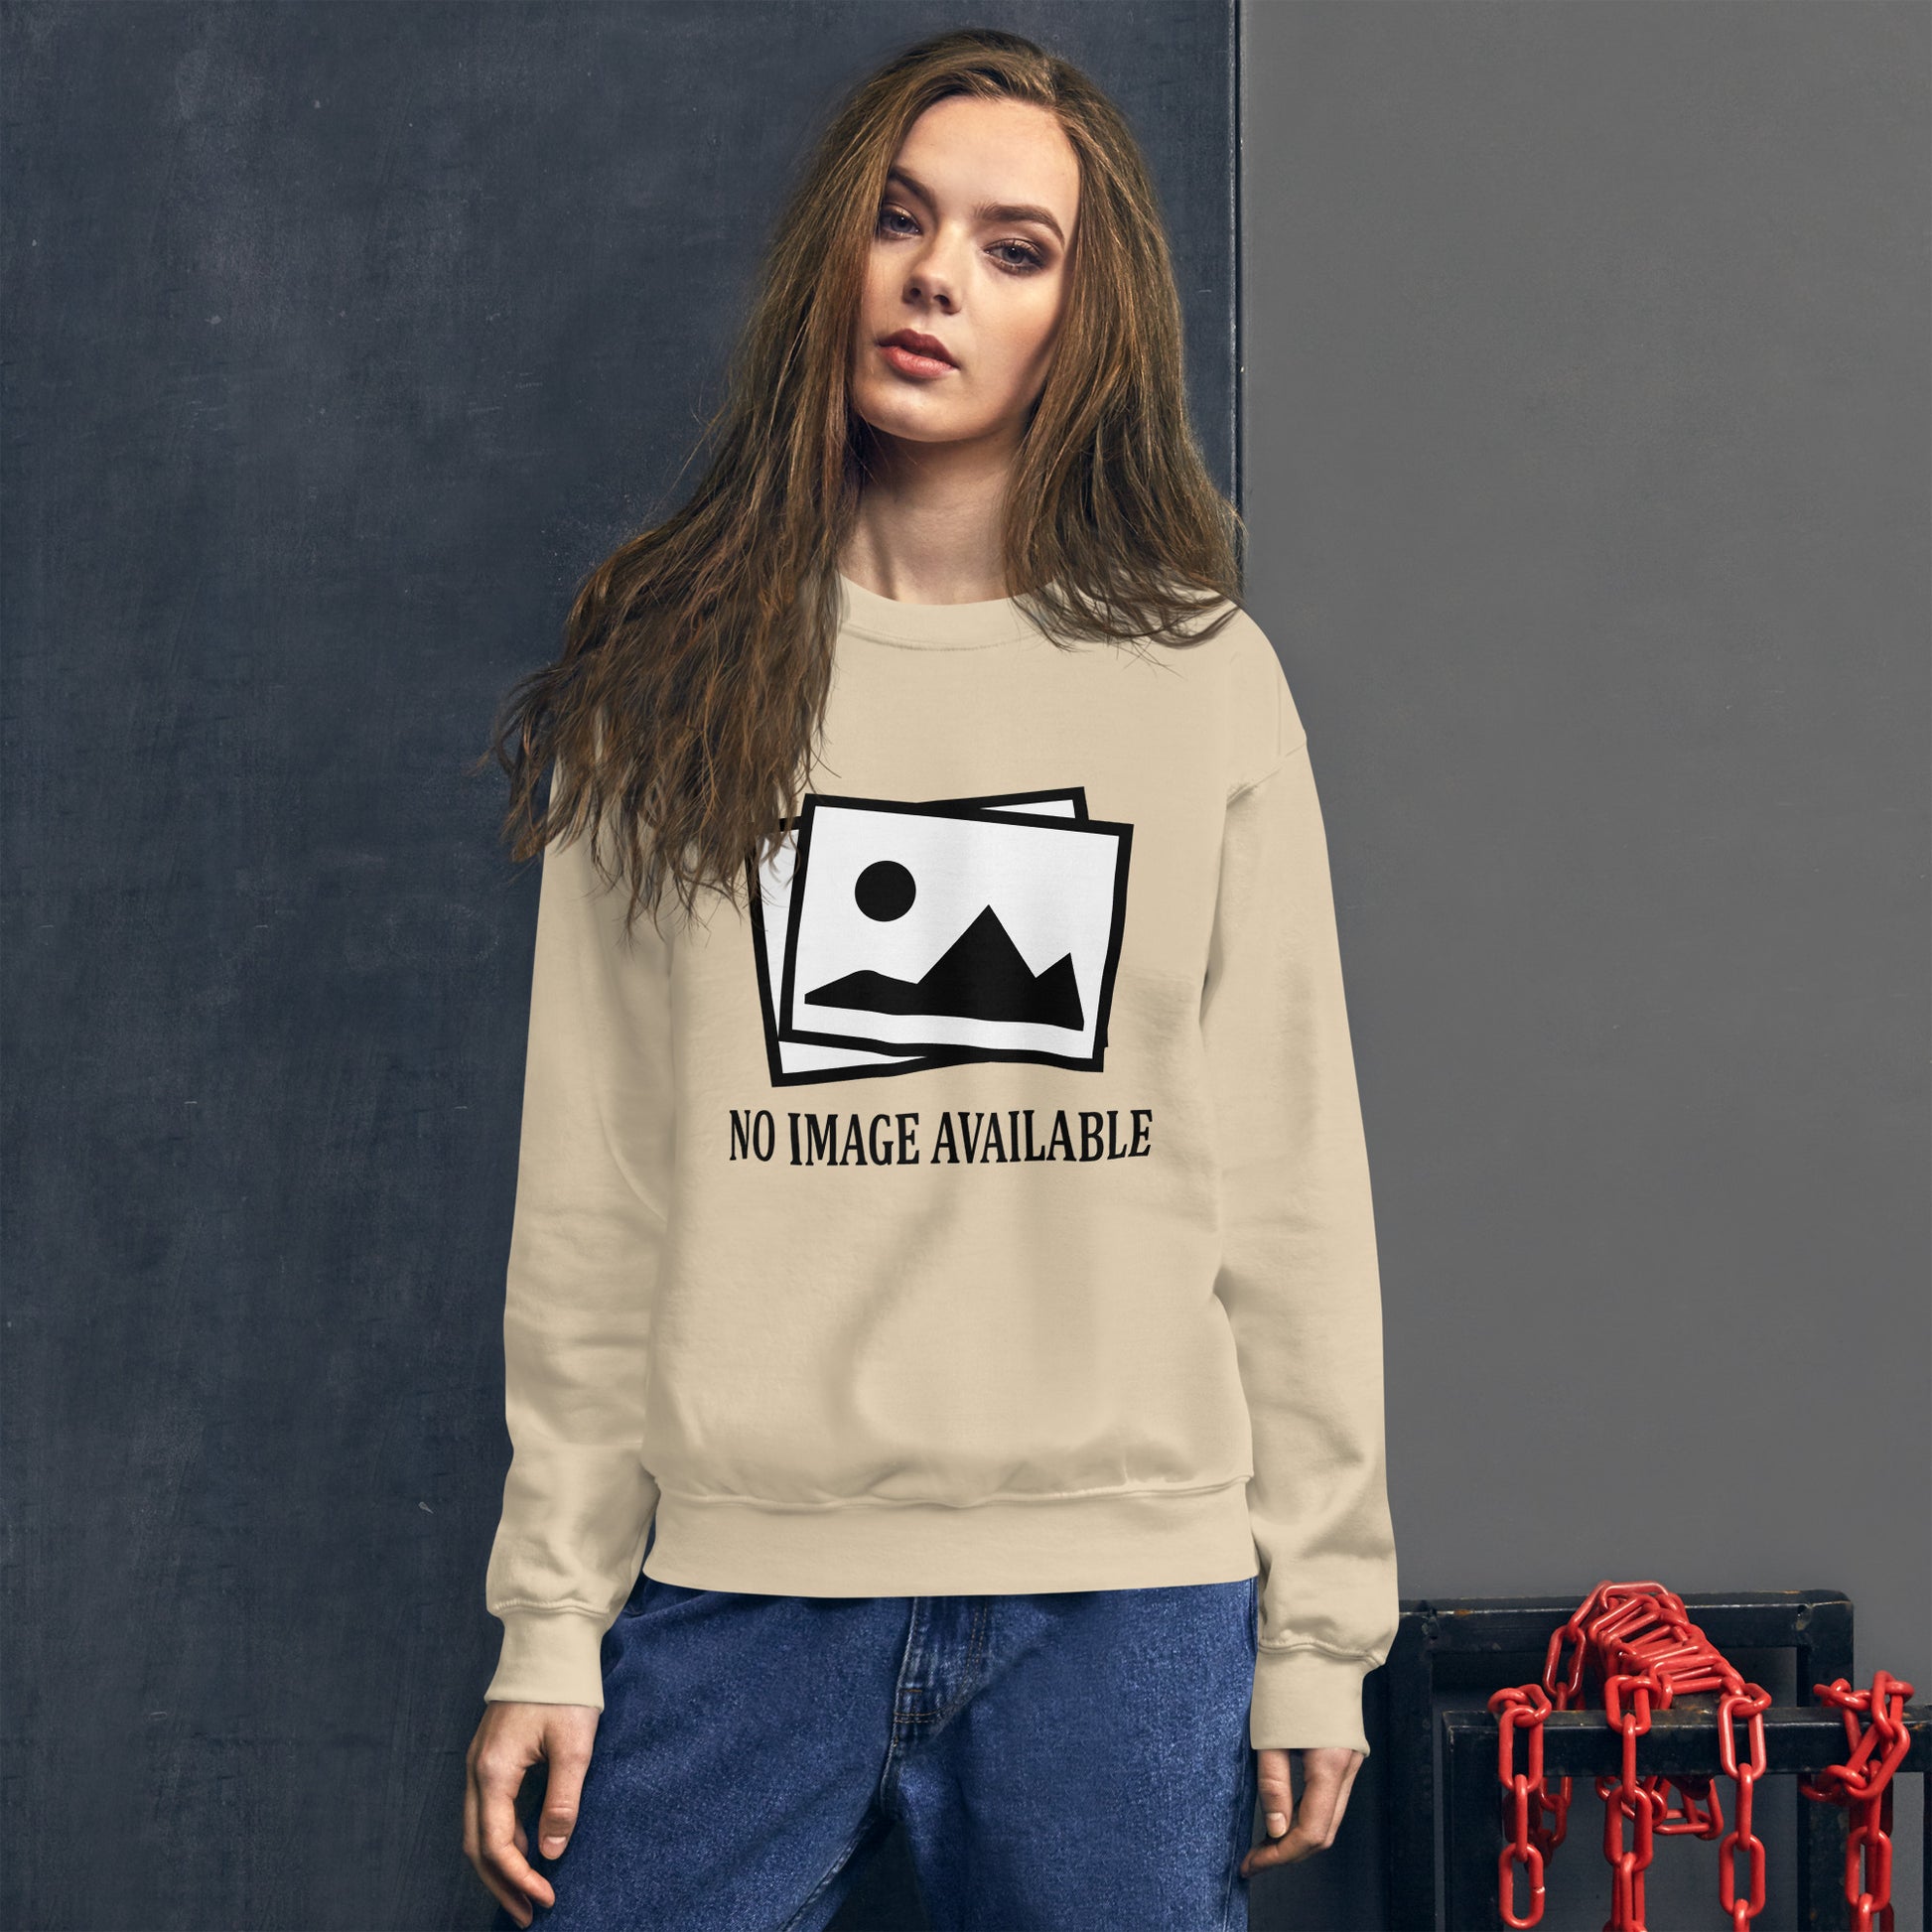 Women with sand sweatshirt with image and text "no image available"